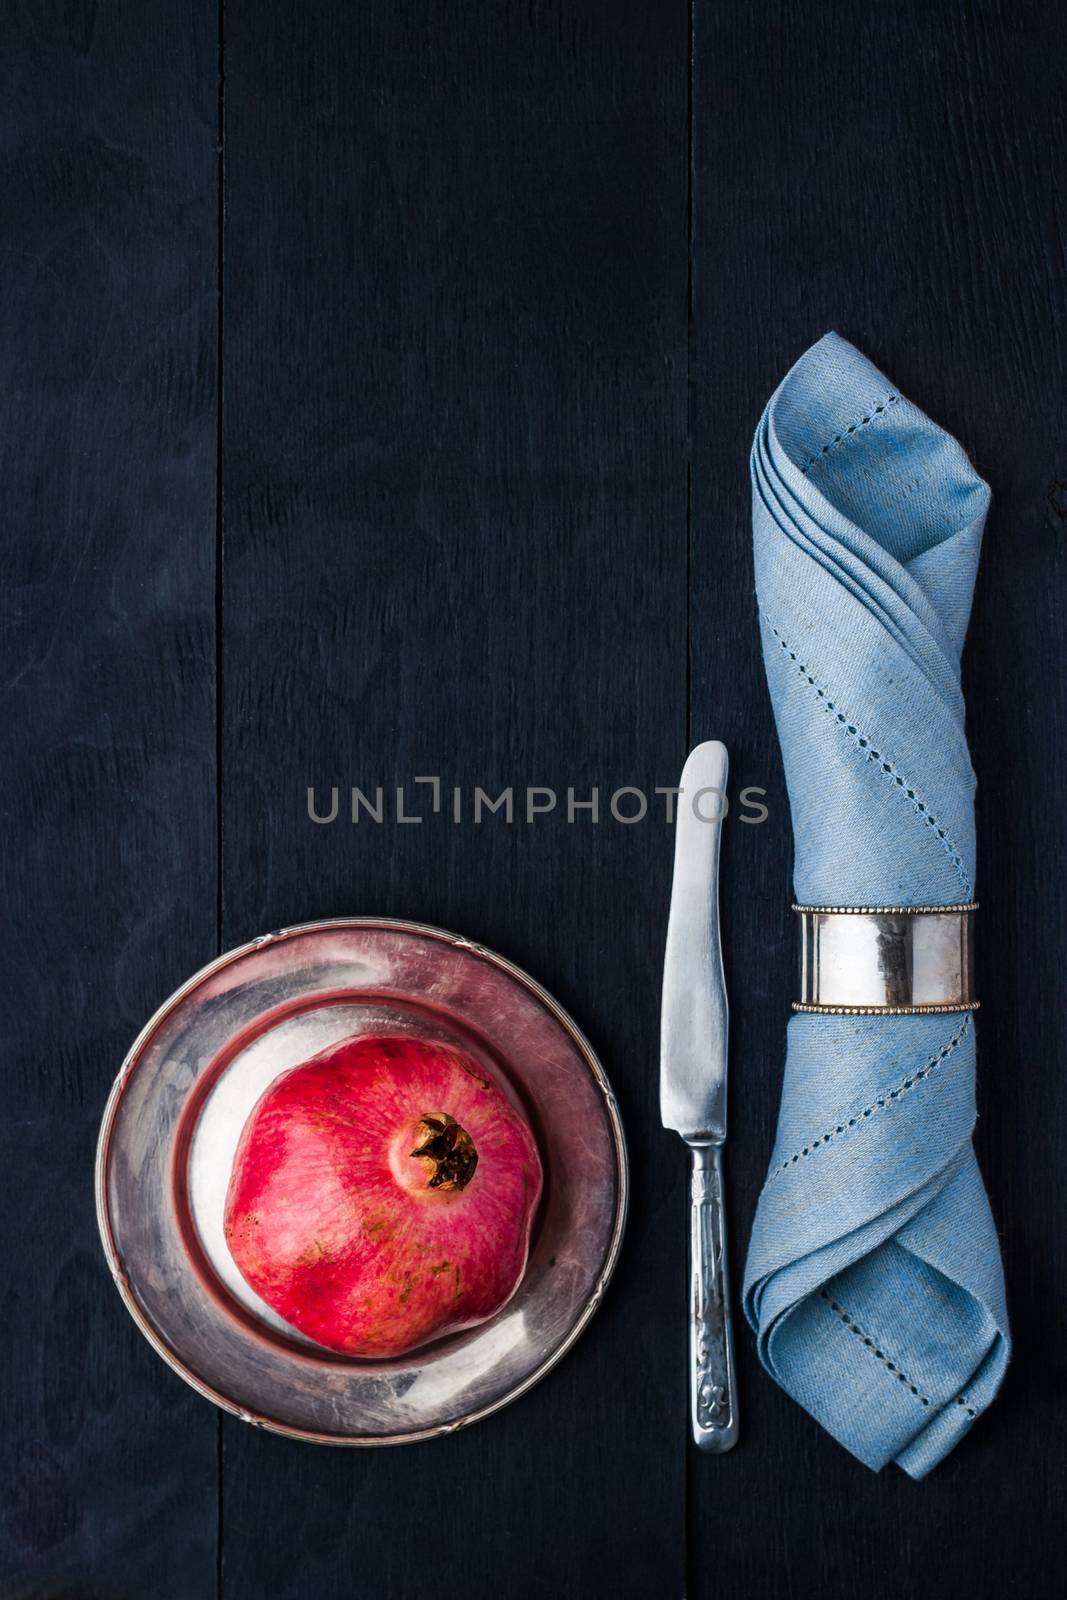 Pomegranate  on the vintage metal plate with knife and napkin vertical